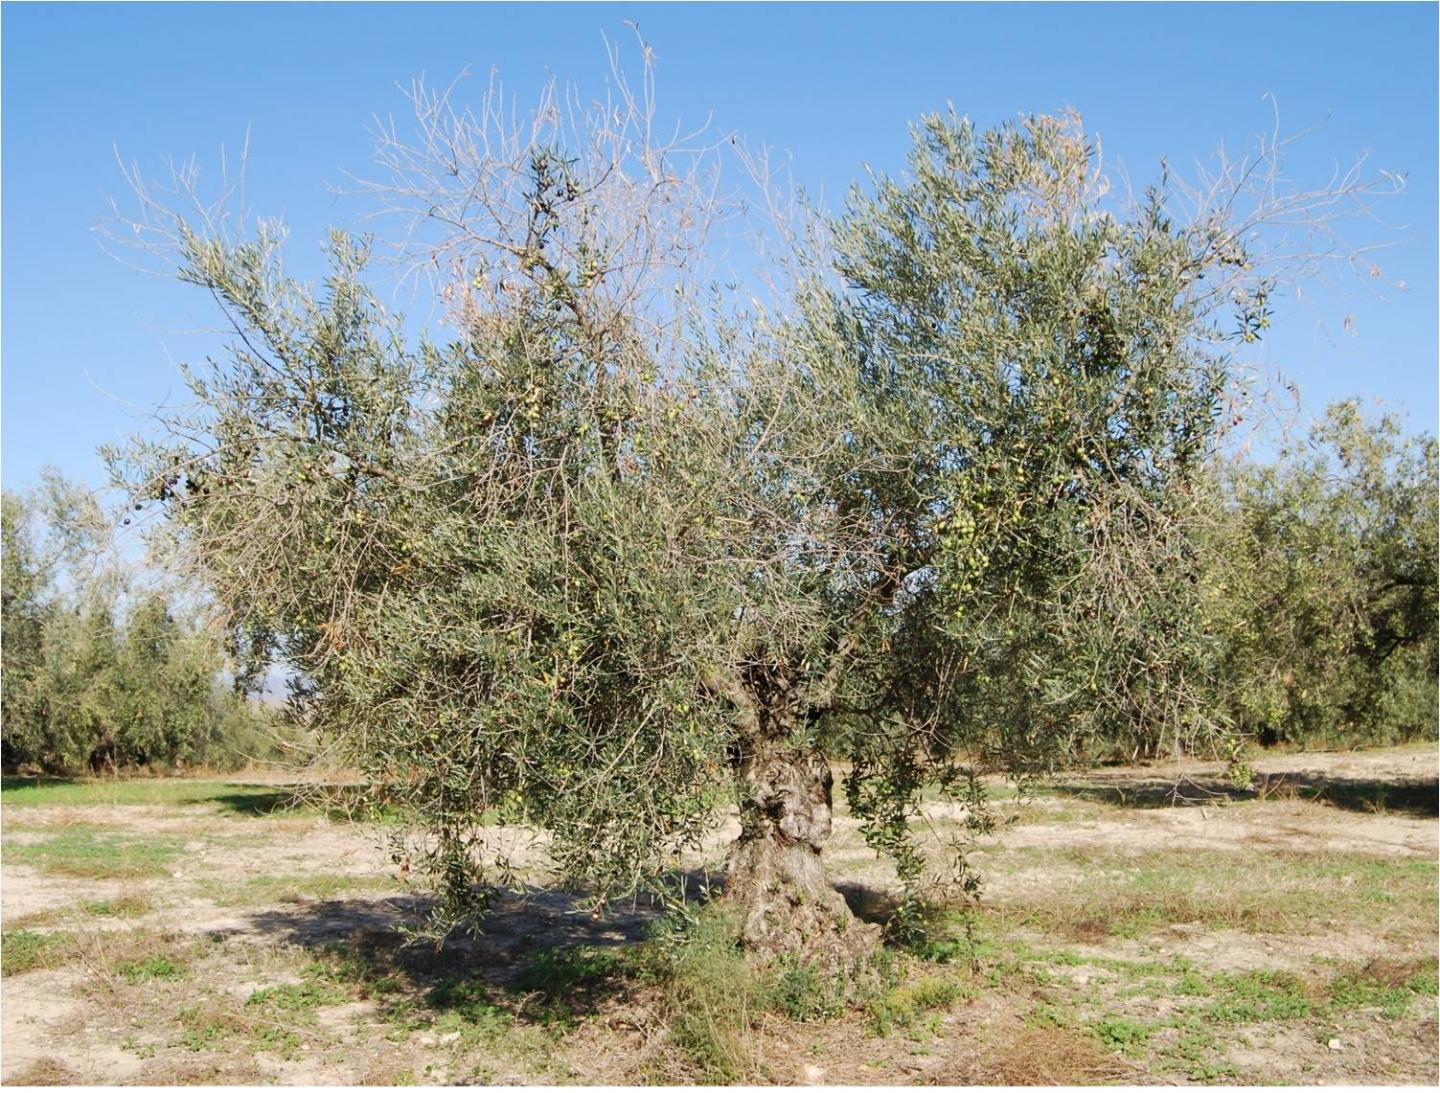 Olive Groves with Antrachnosis